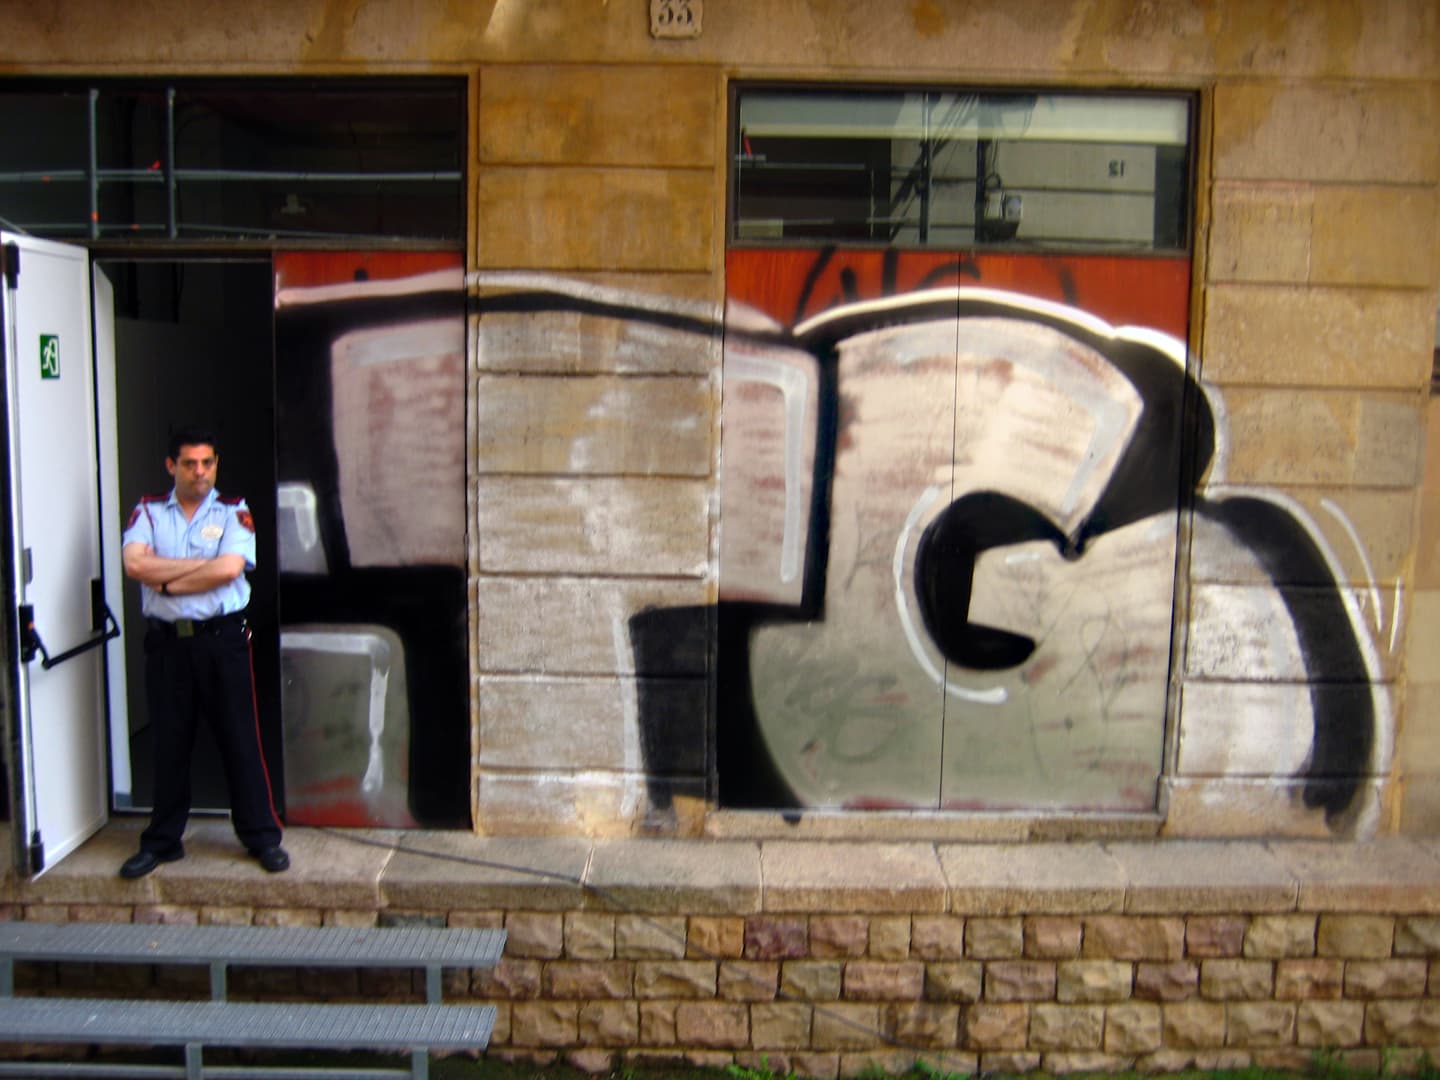 Security guard outside an open door to a large building with his arms crossed and with graffitti blocked out on the wall behind him